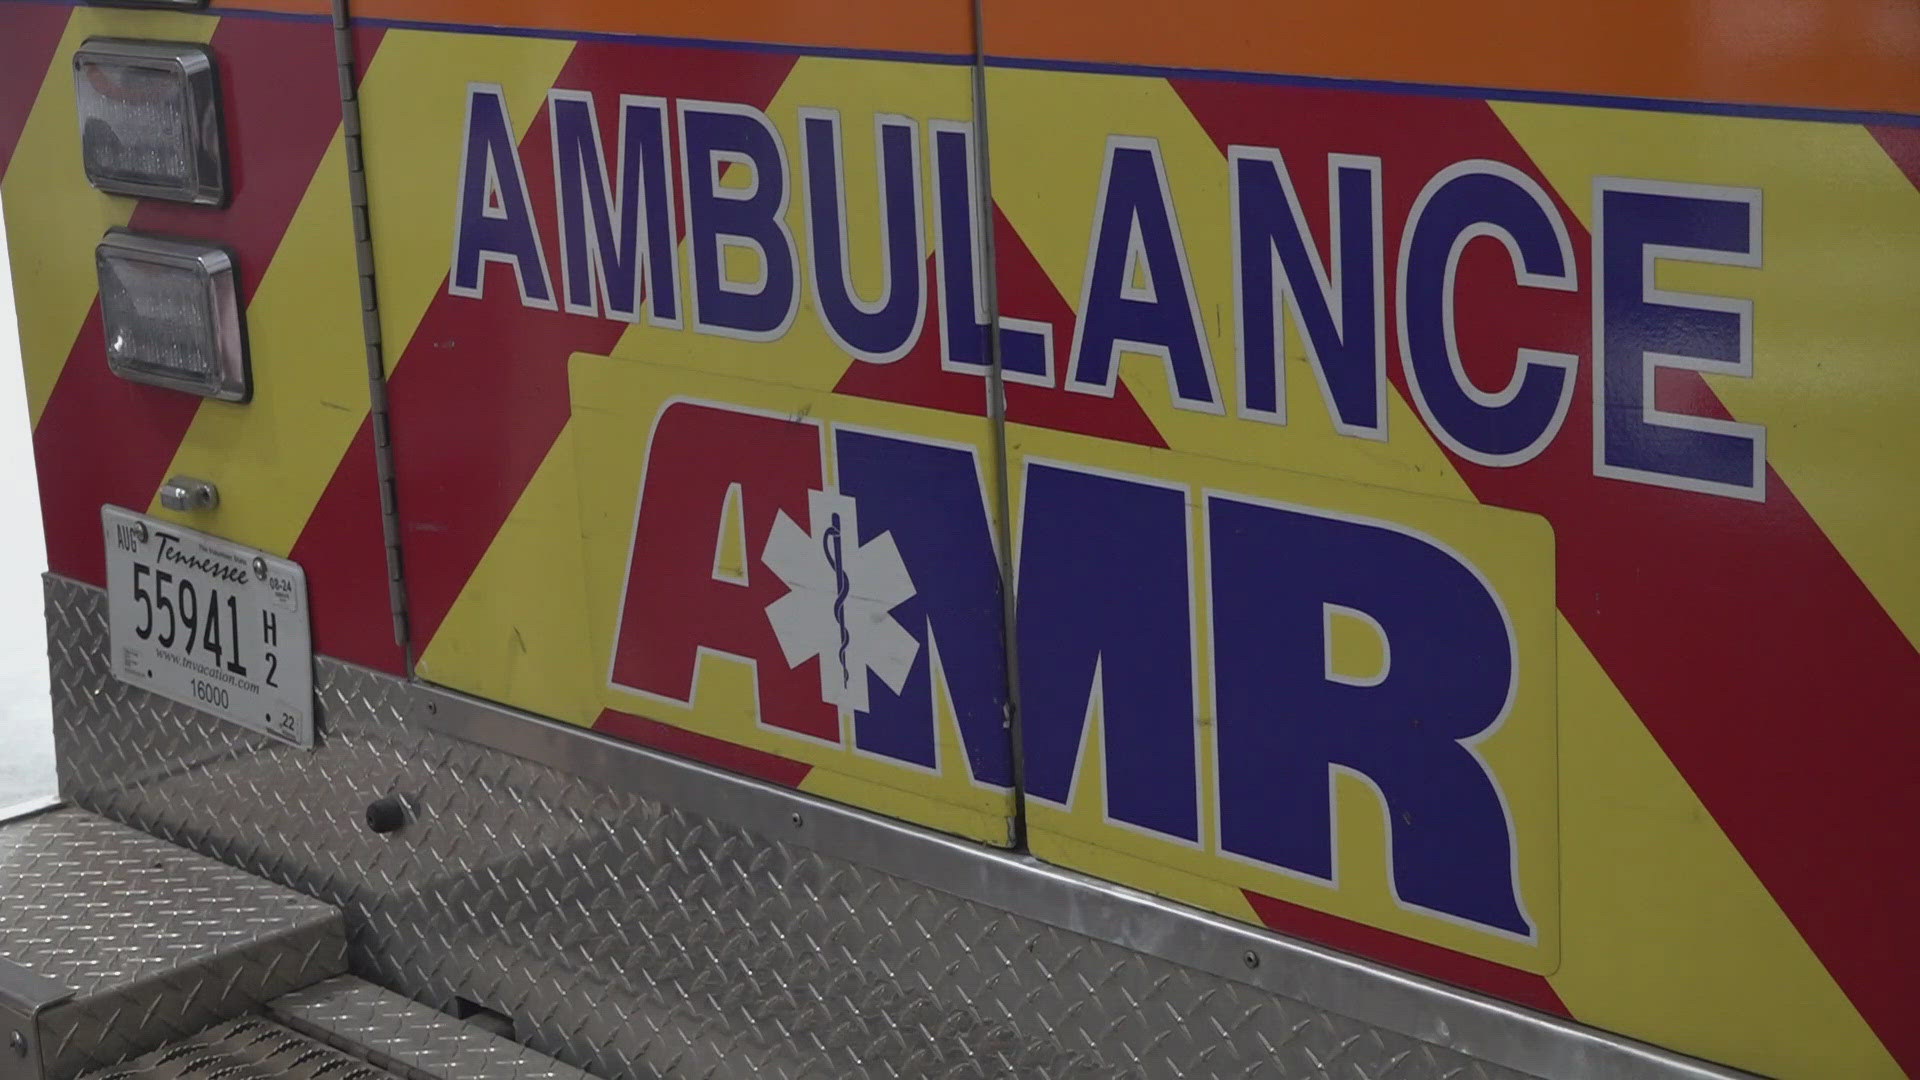 So far, AMR hasn't reached the county's goal of 90% success in response times.